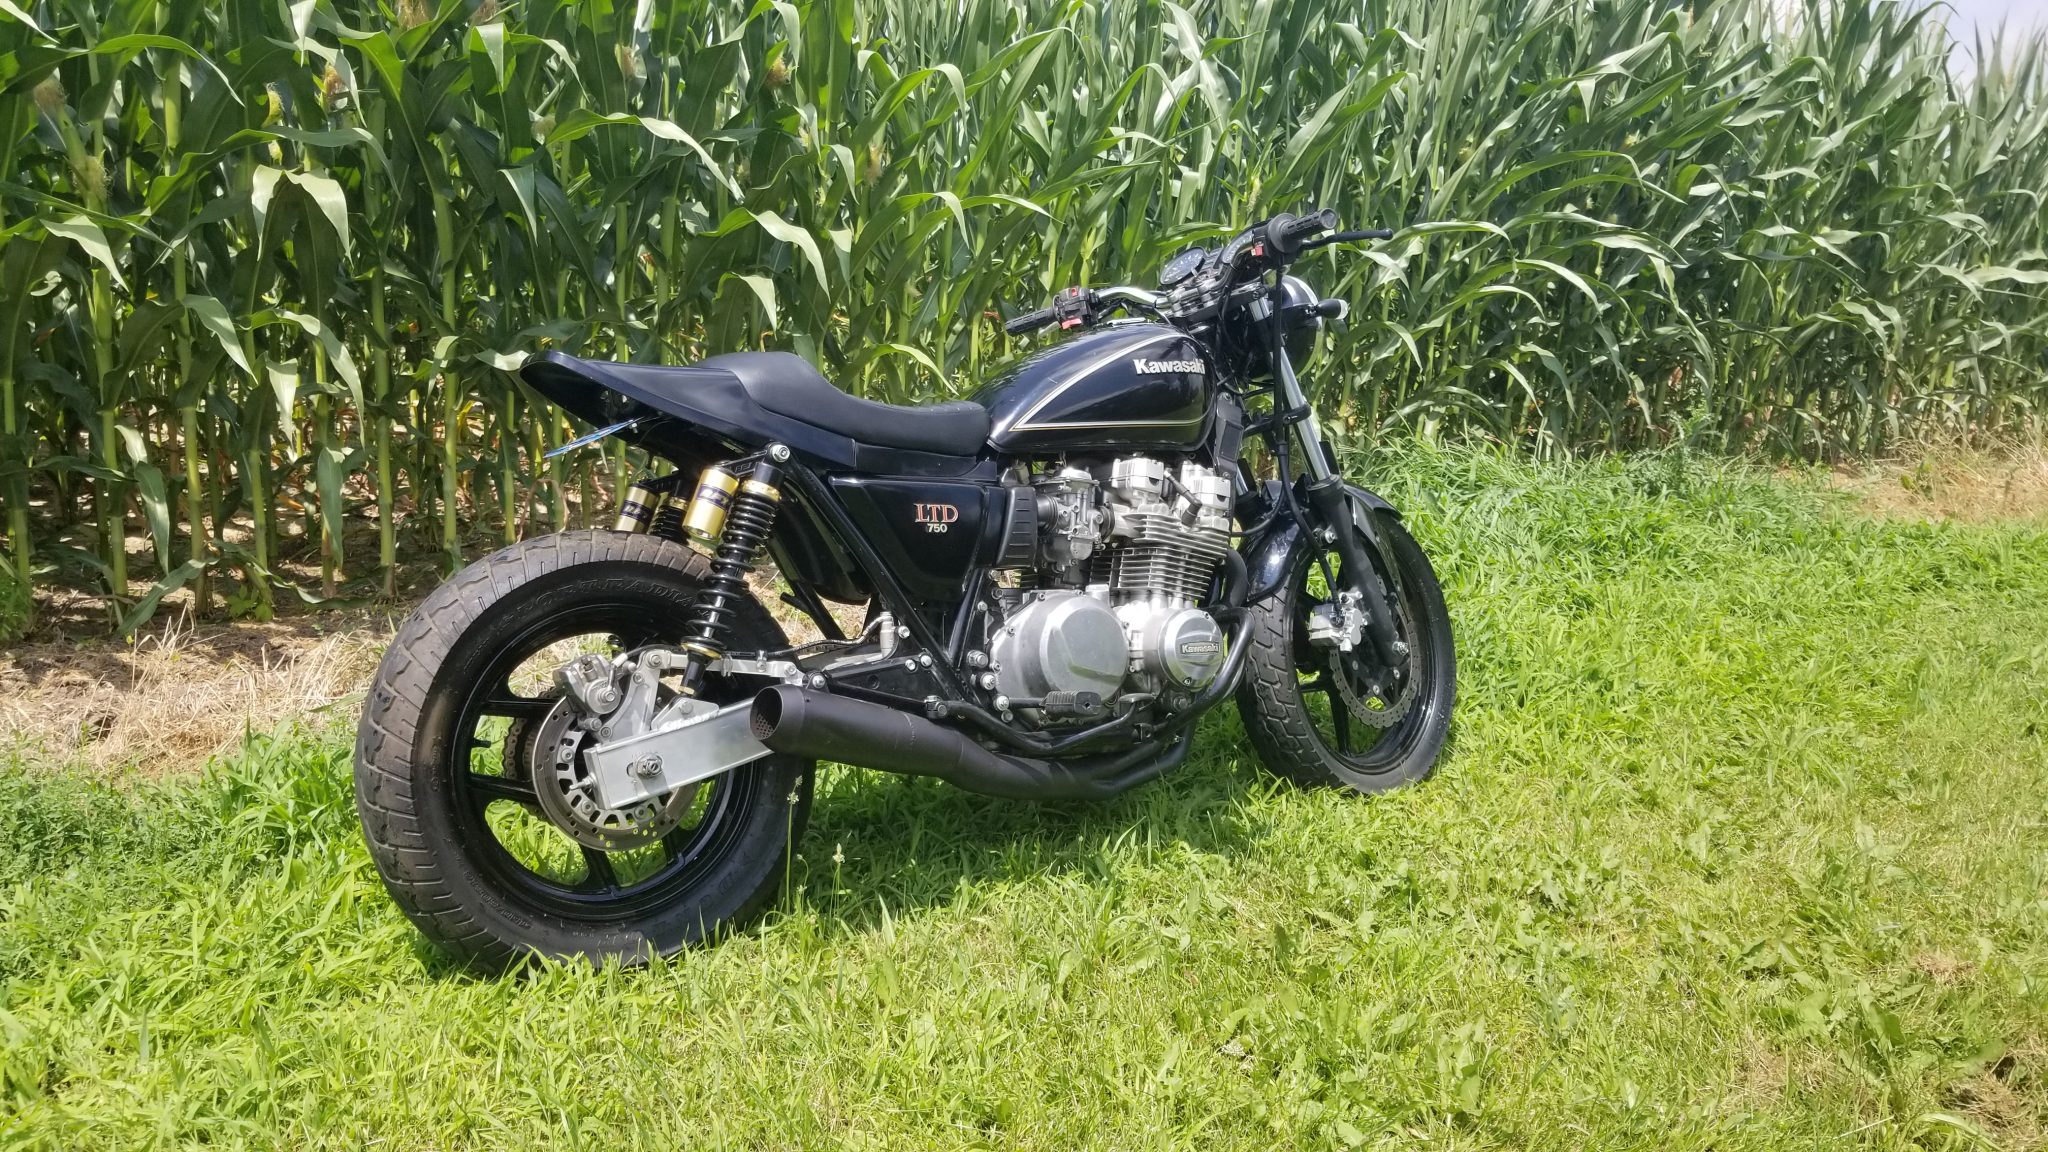 1983 Kawasaki Kz For Sale 17 Used Motorcycles From $1,060